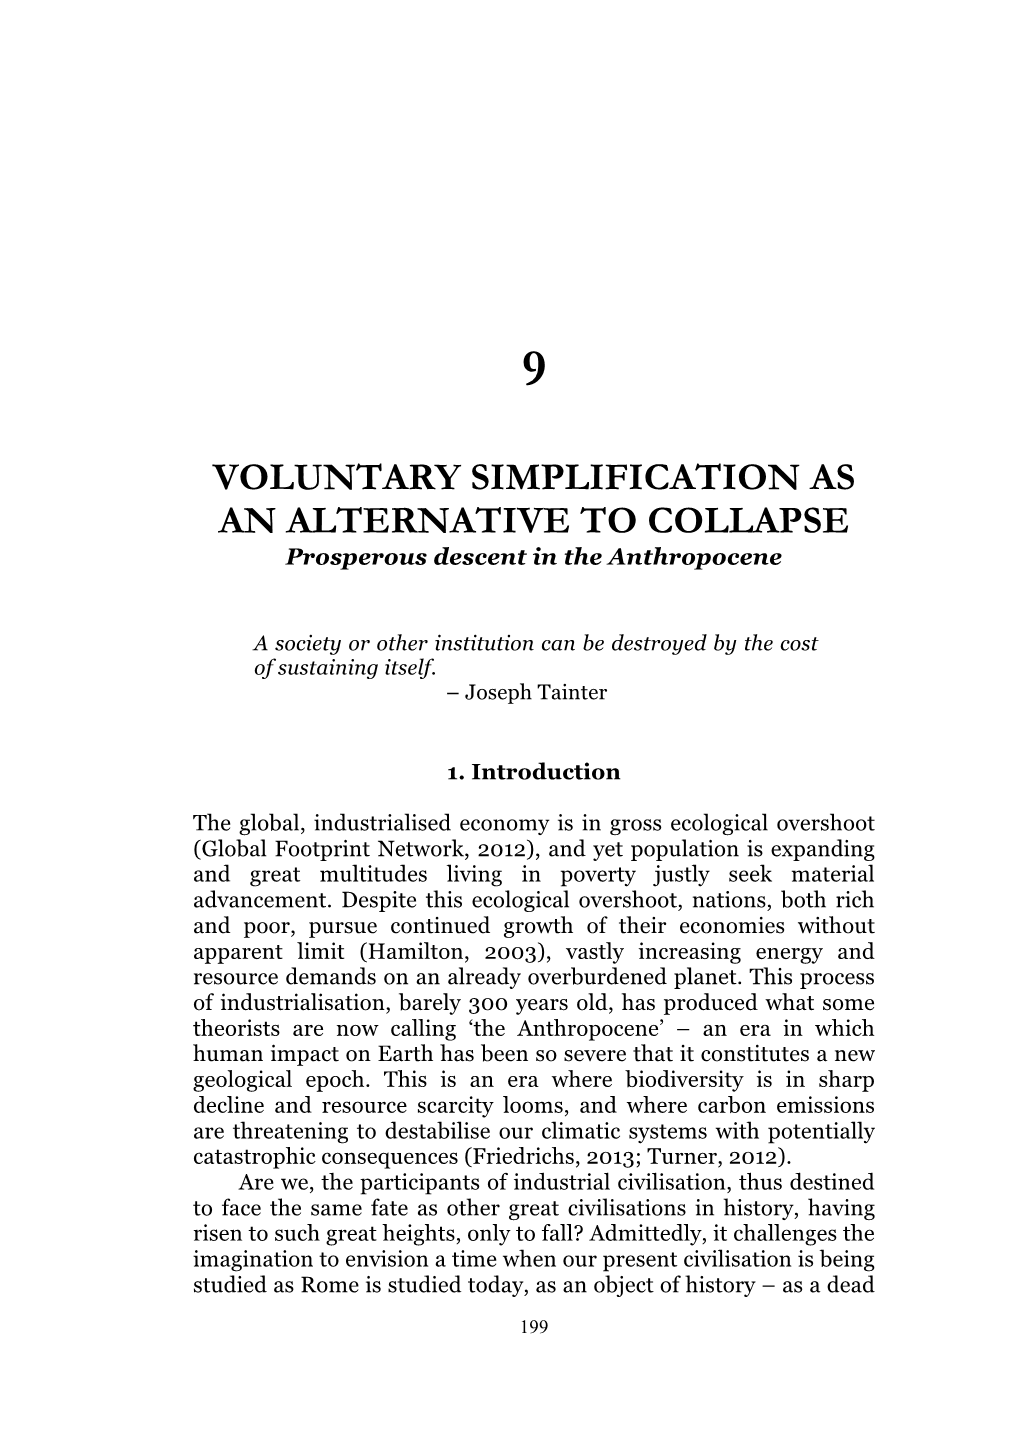 Voluntary Simplification As an Alternative to Collapse (Samuel